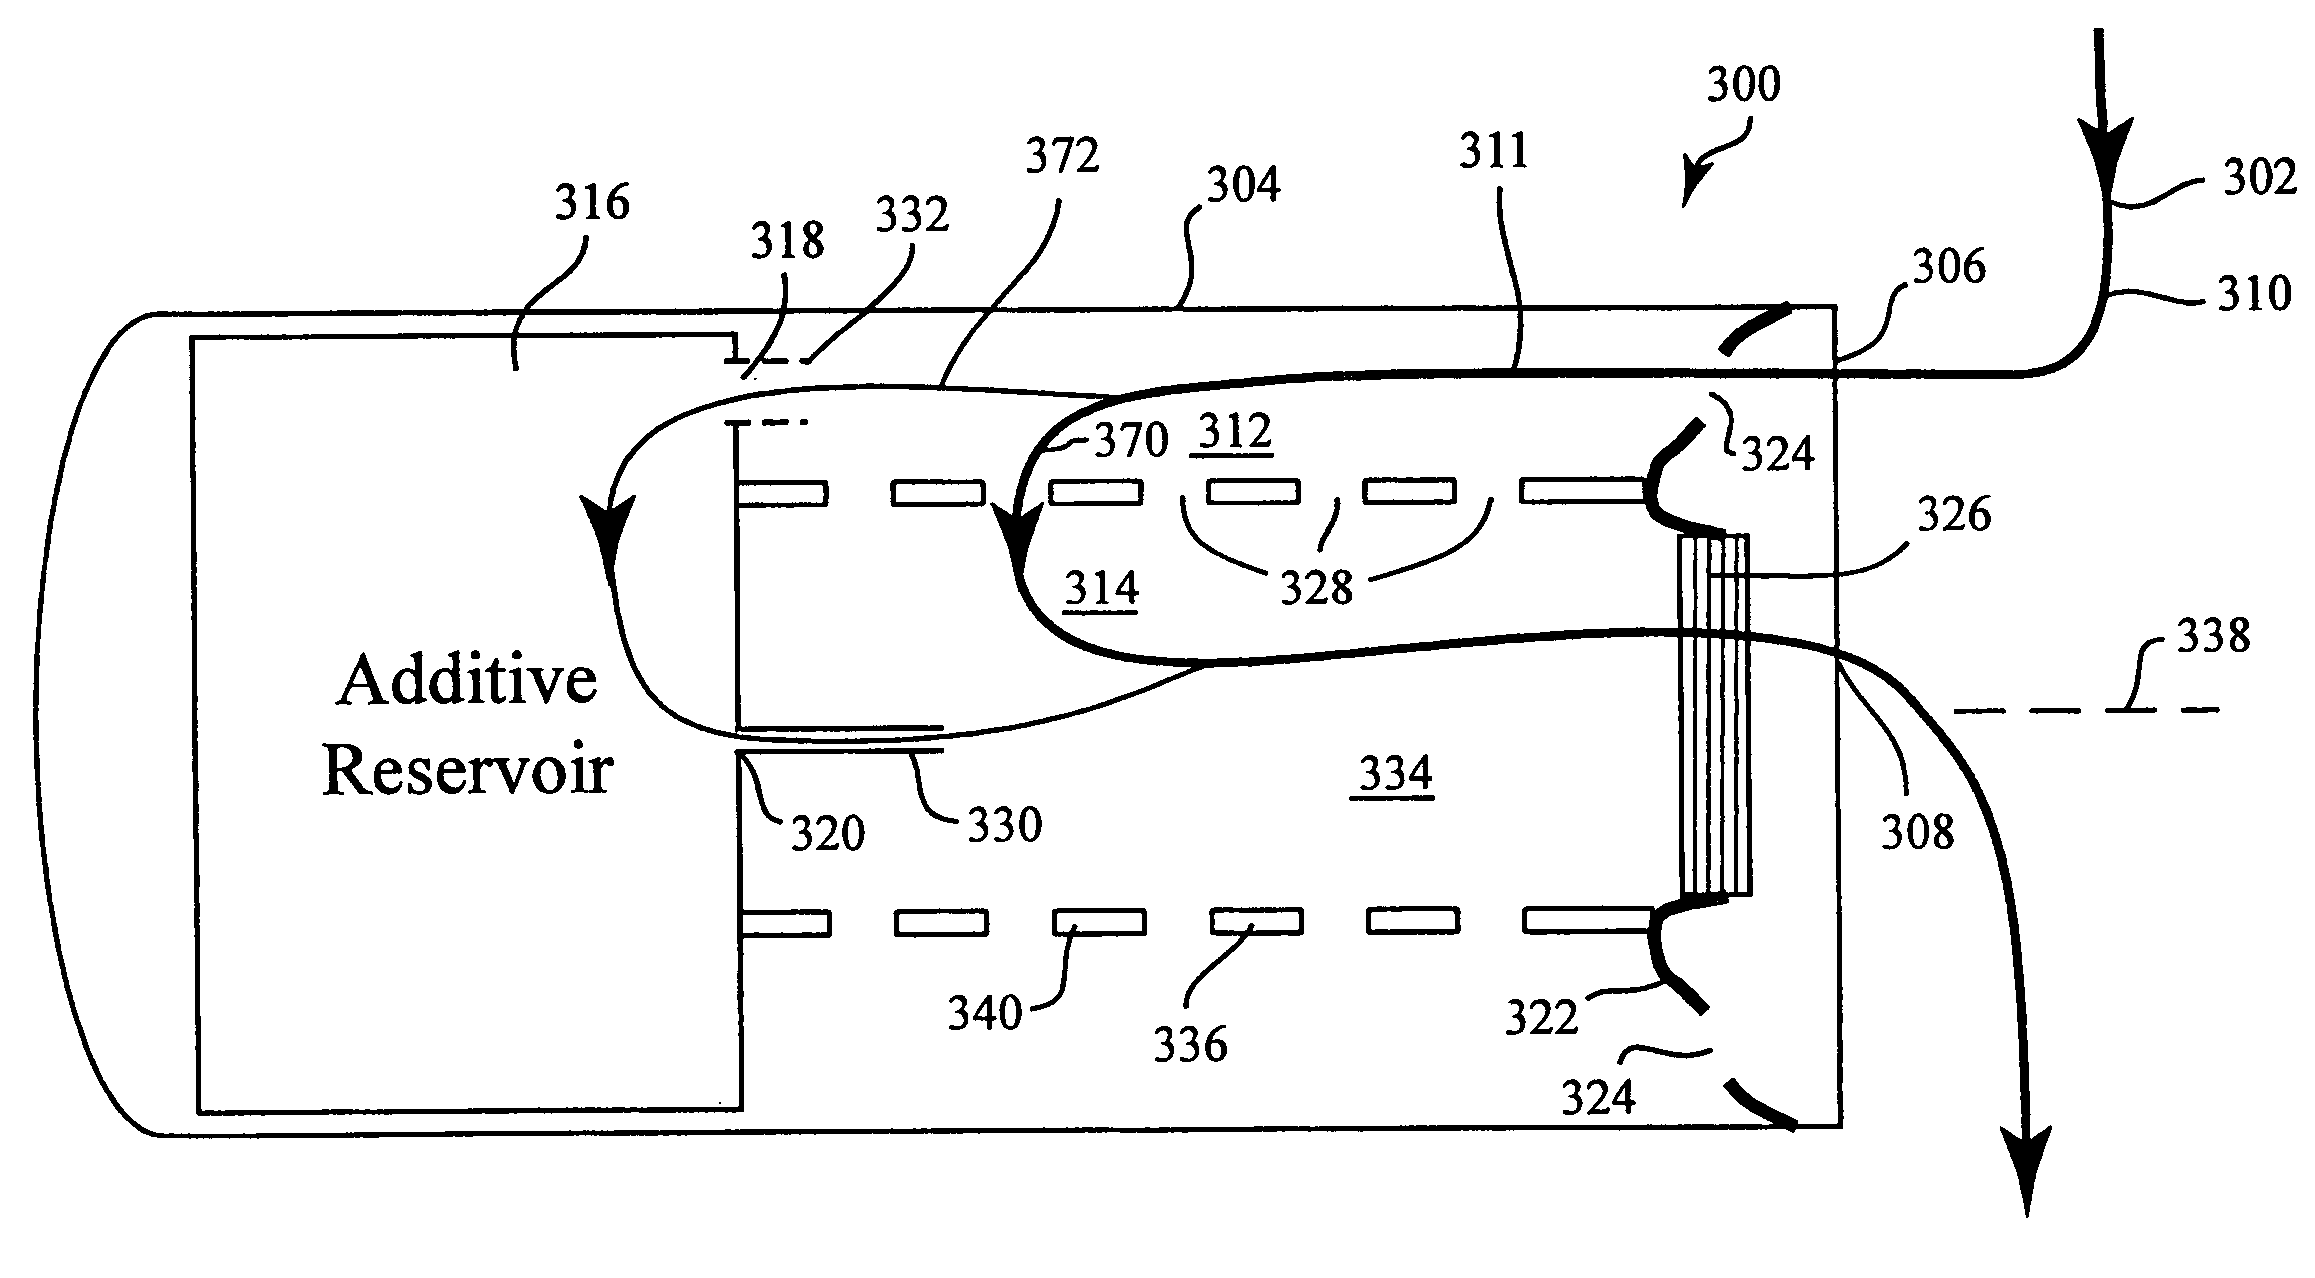 Pressure gradient dosing system for fluid supply